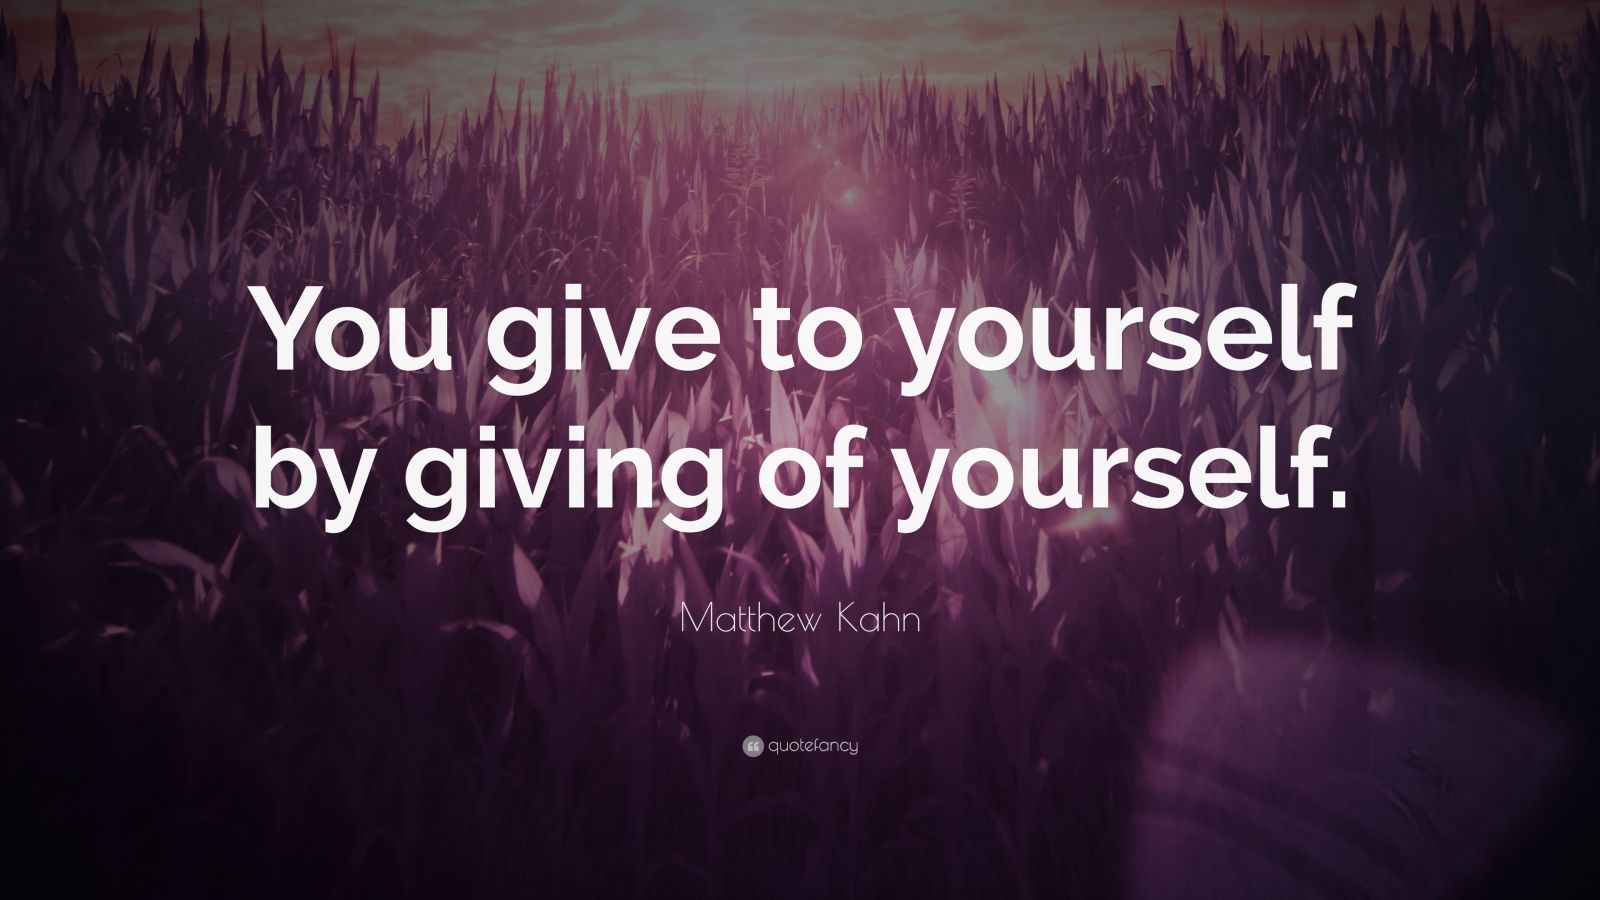 Matthew Kahn Quote “you Give To Yourself By Giving Of Yourself” 7